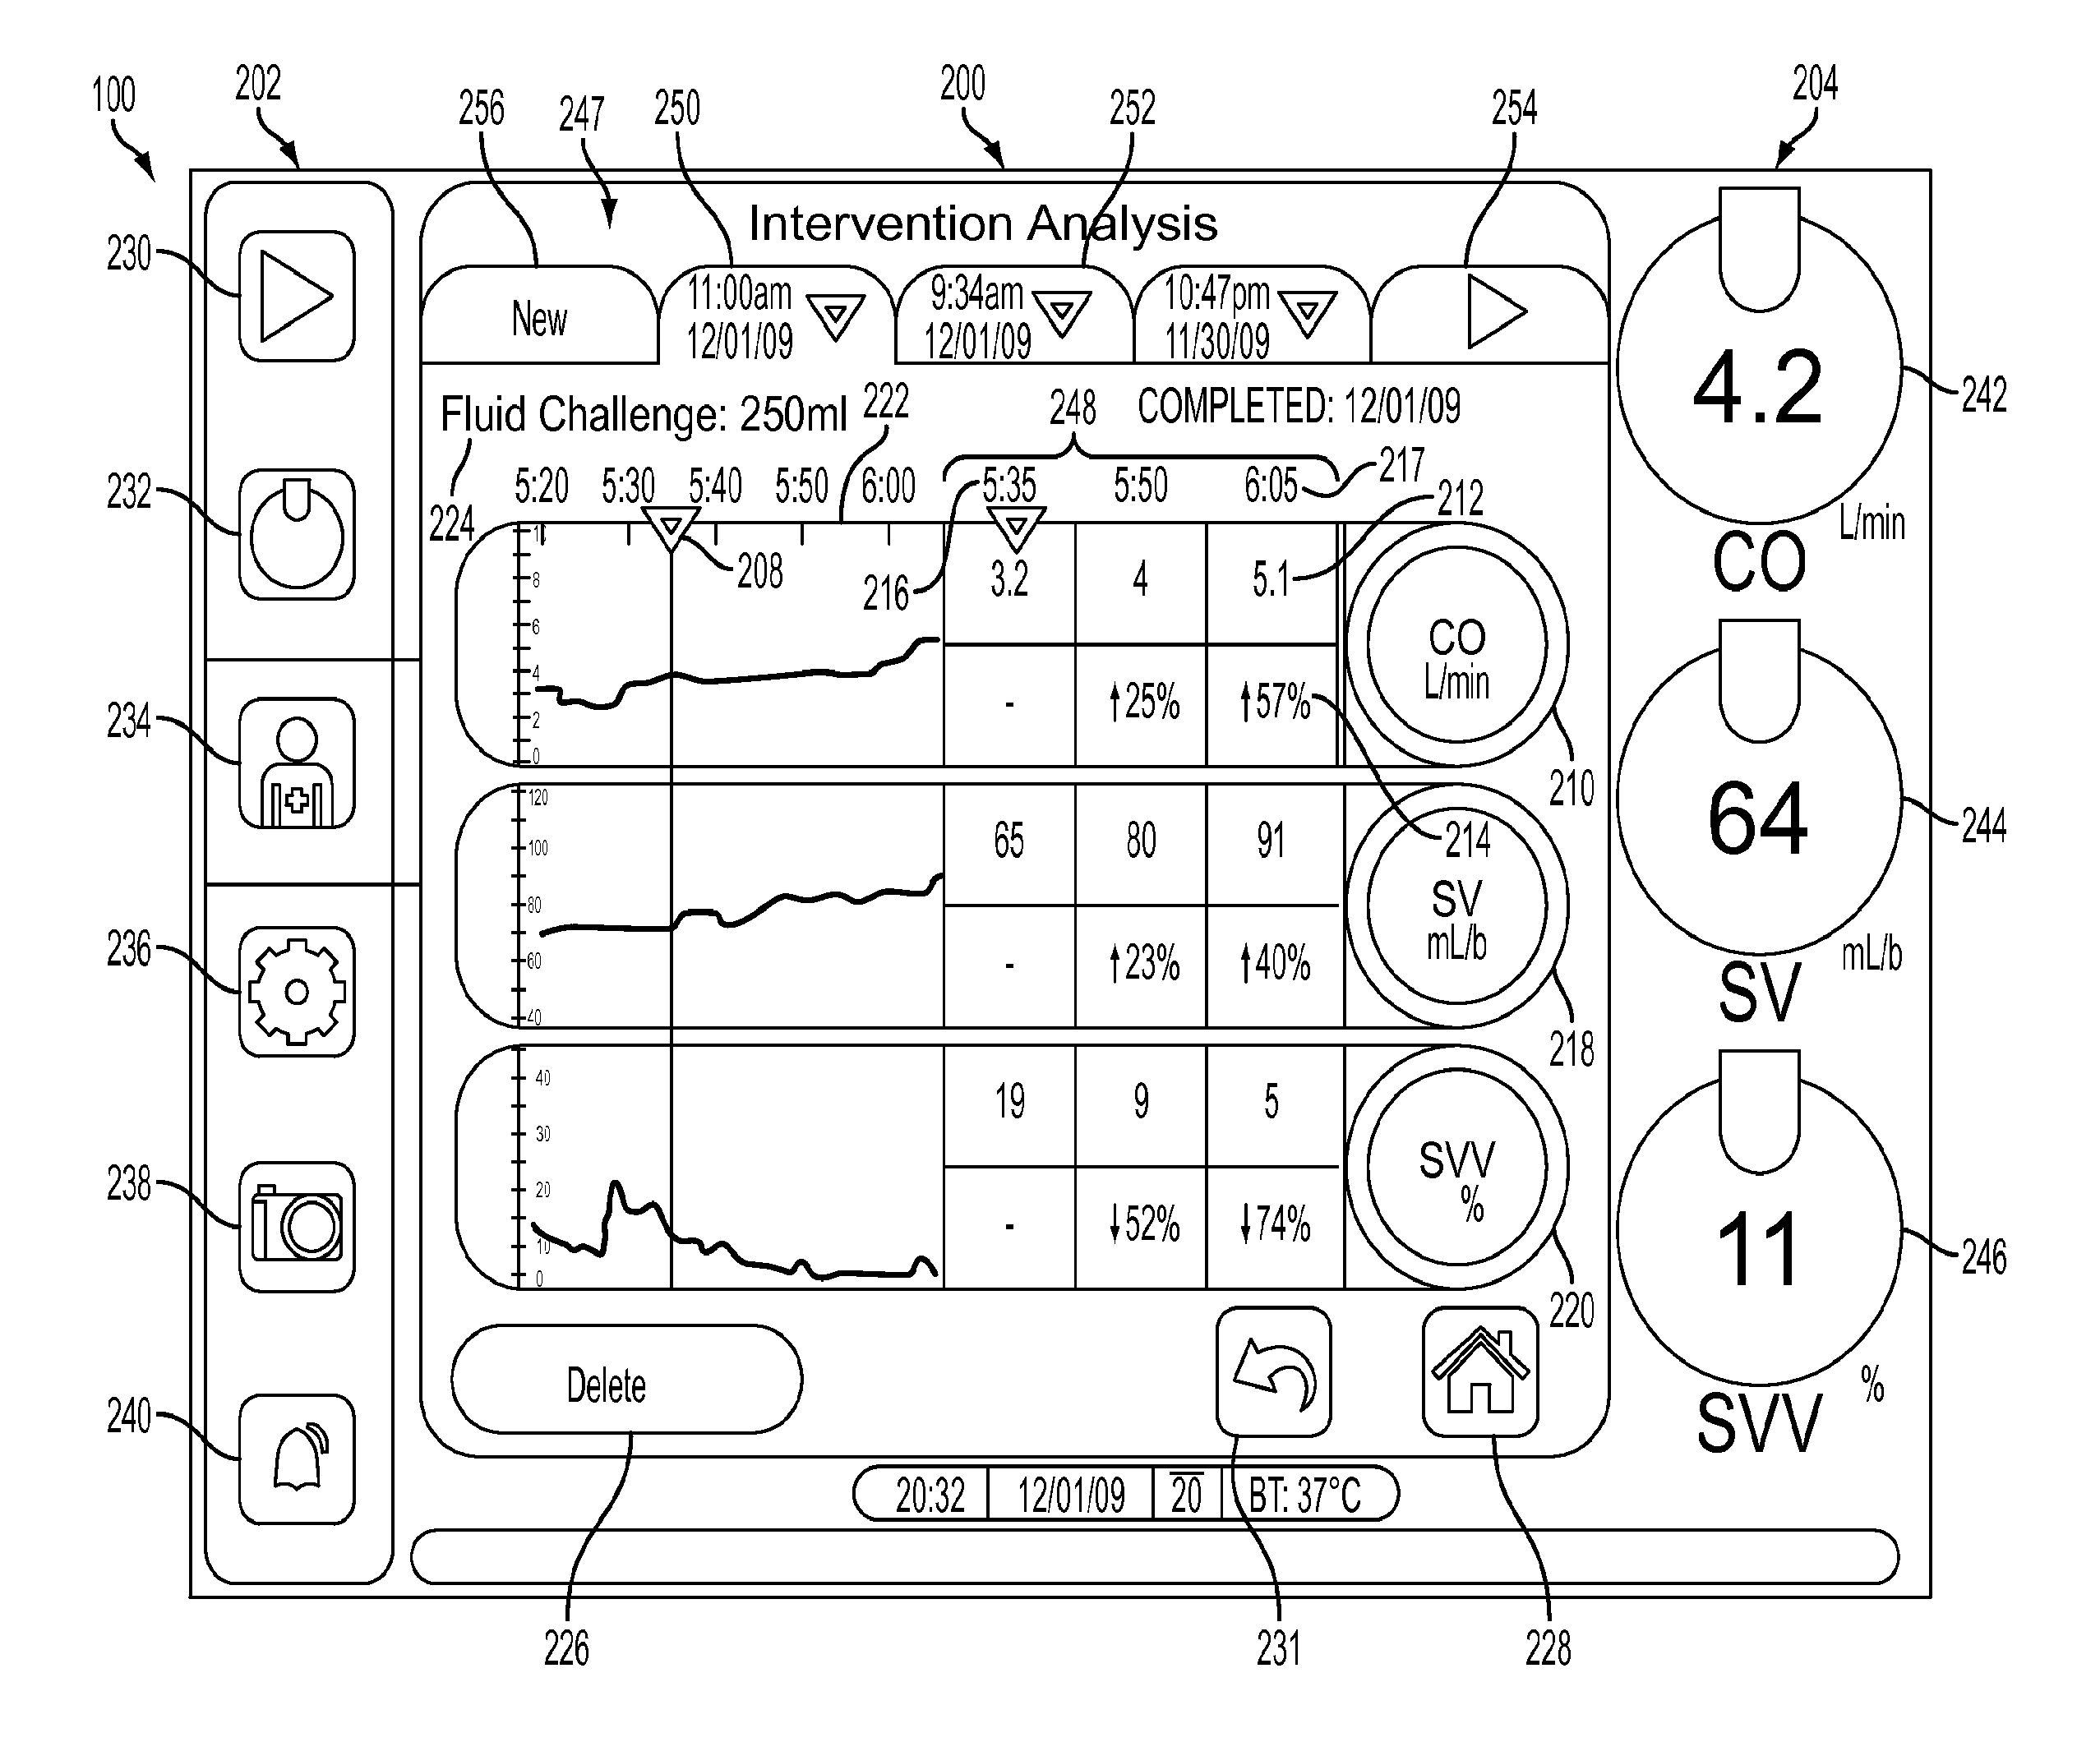 Systems and methods for monitoring and displaying a patient's status